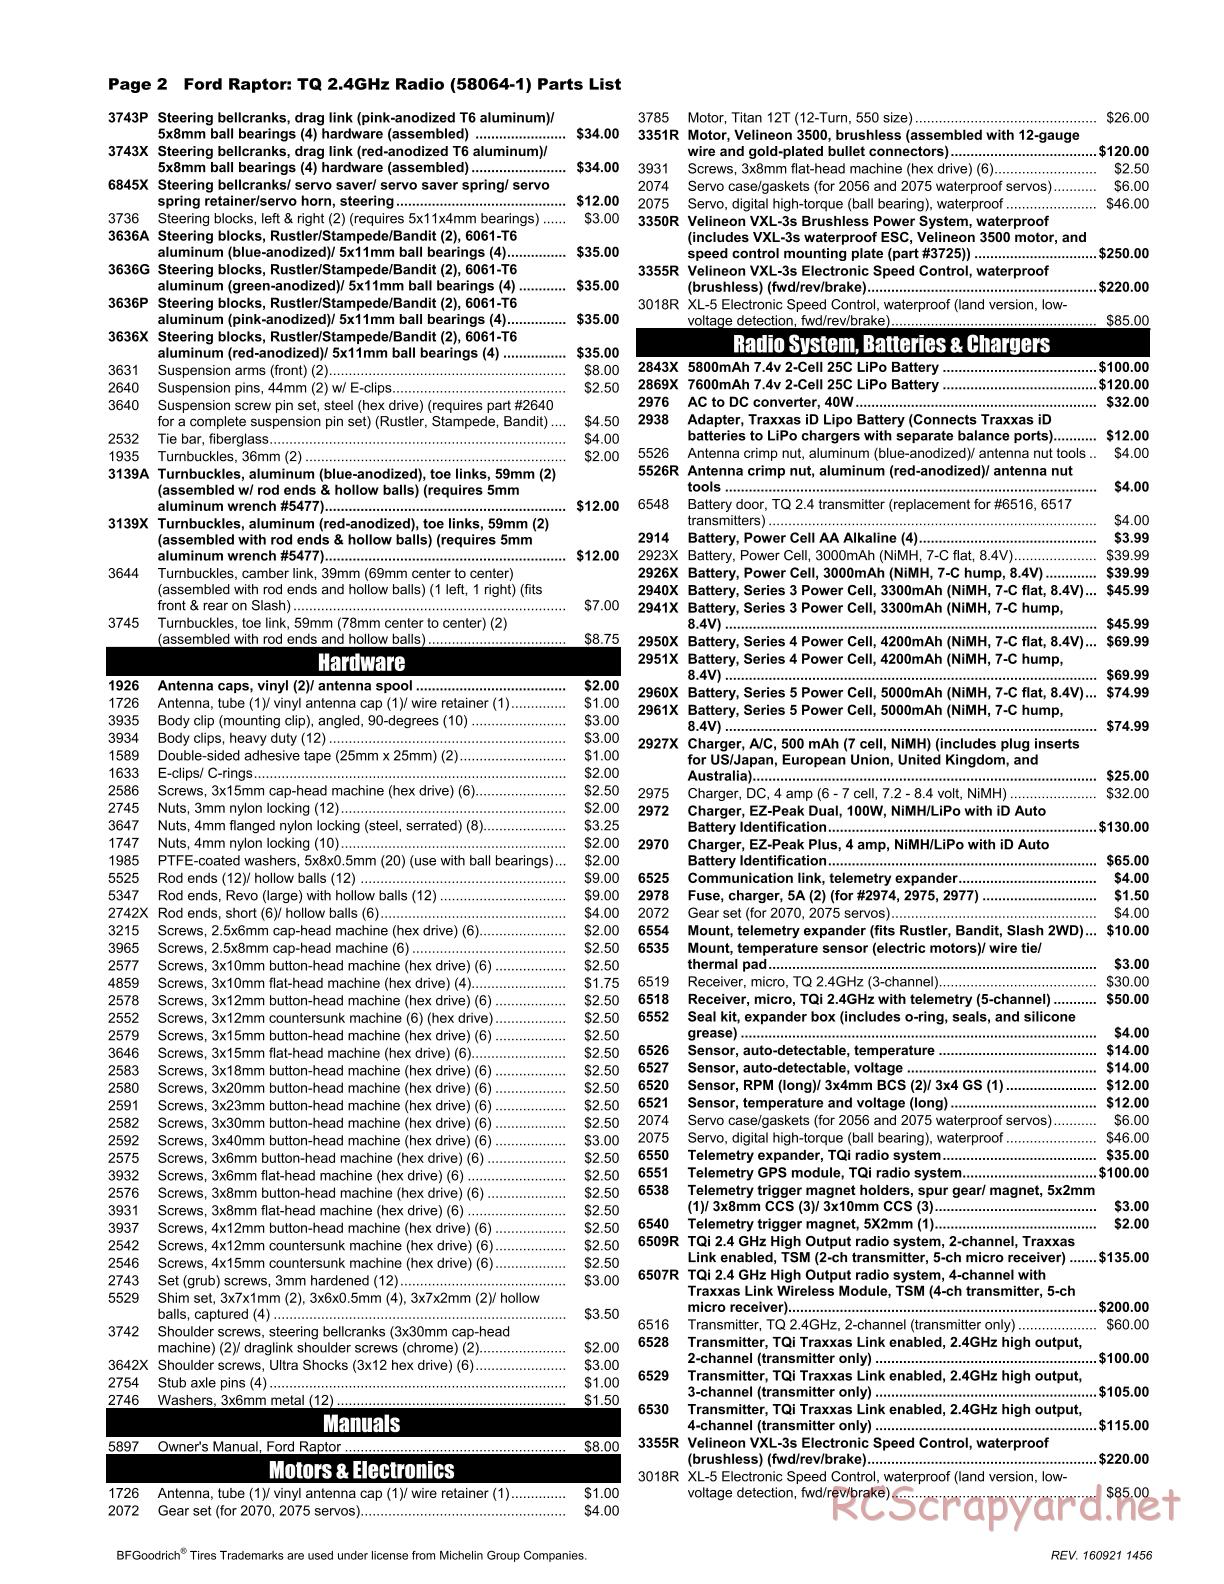 Traxxas - Ford F-150 SVT Raptor (2015) - Parts List - Page 2